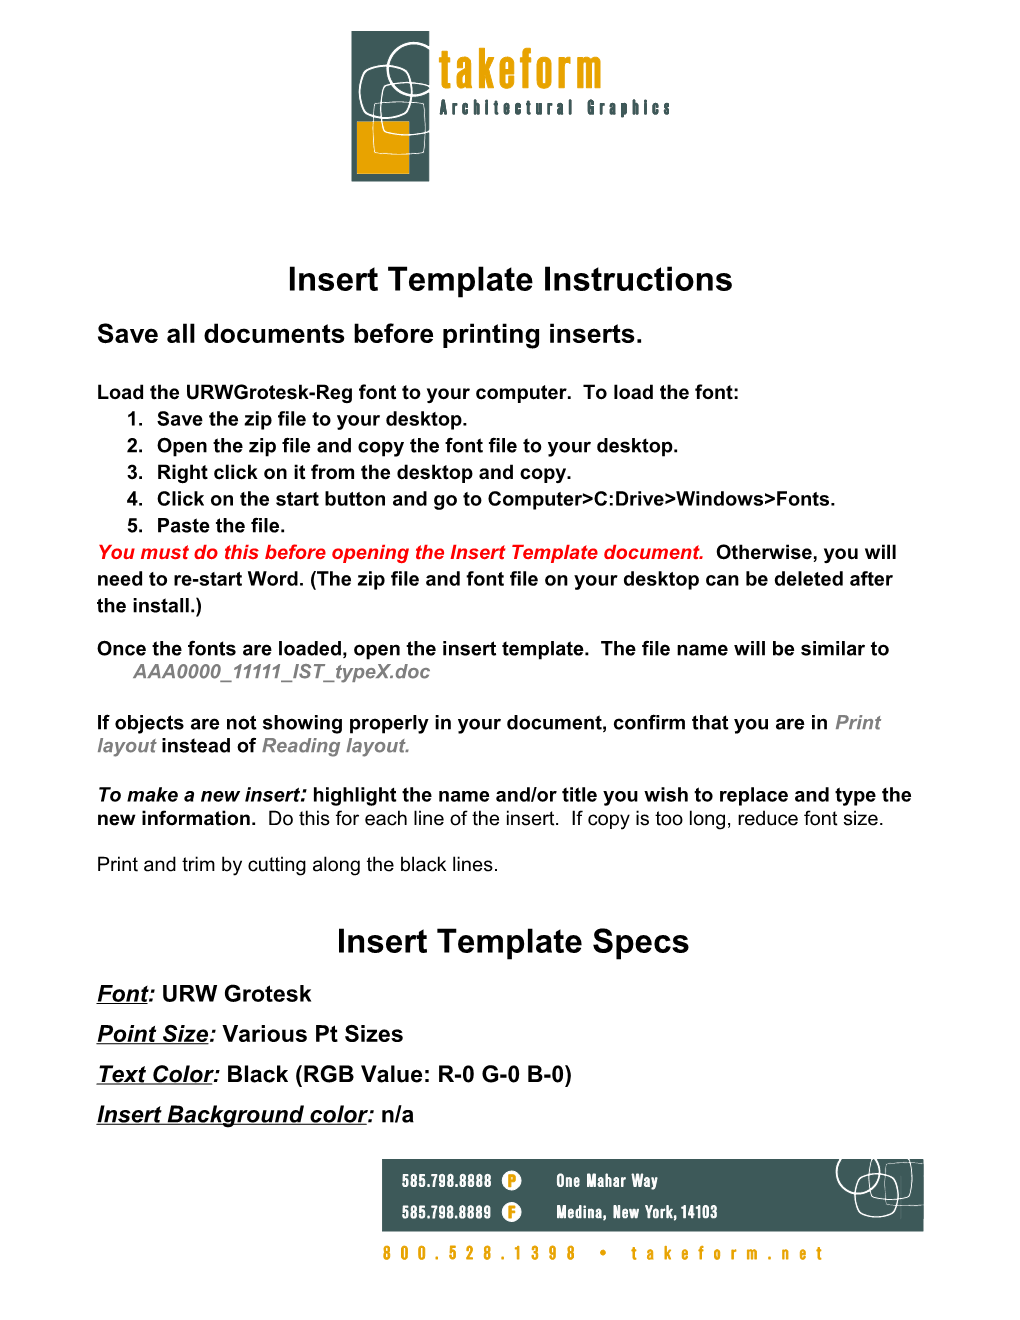 Save All Documents Before Printing Inserts